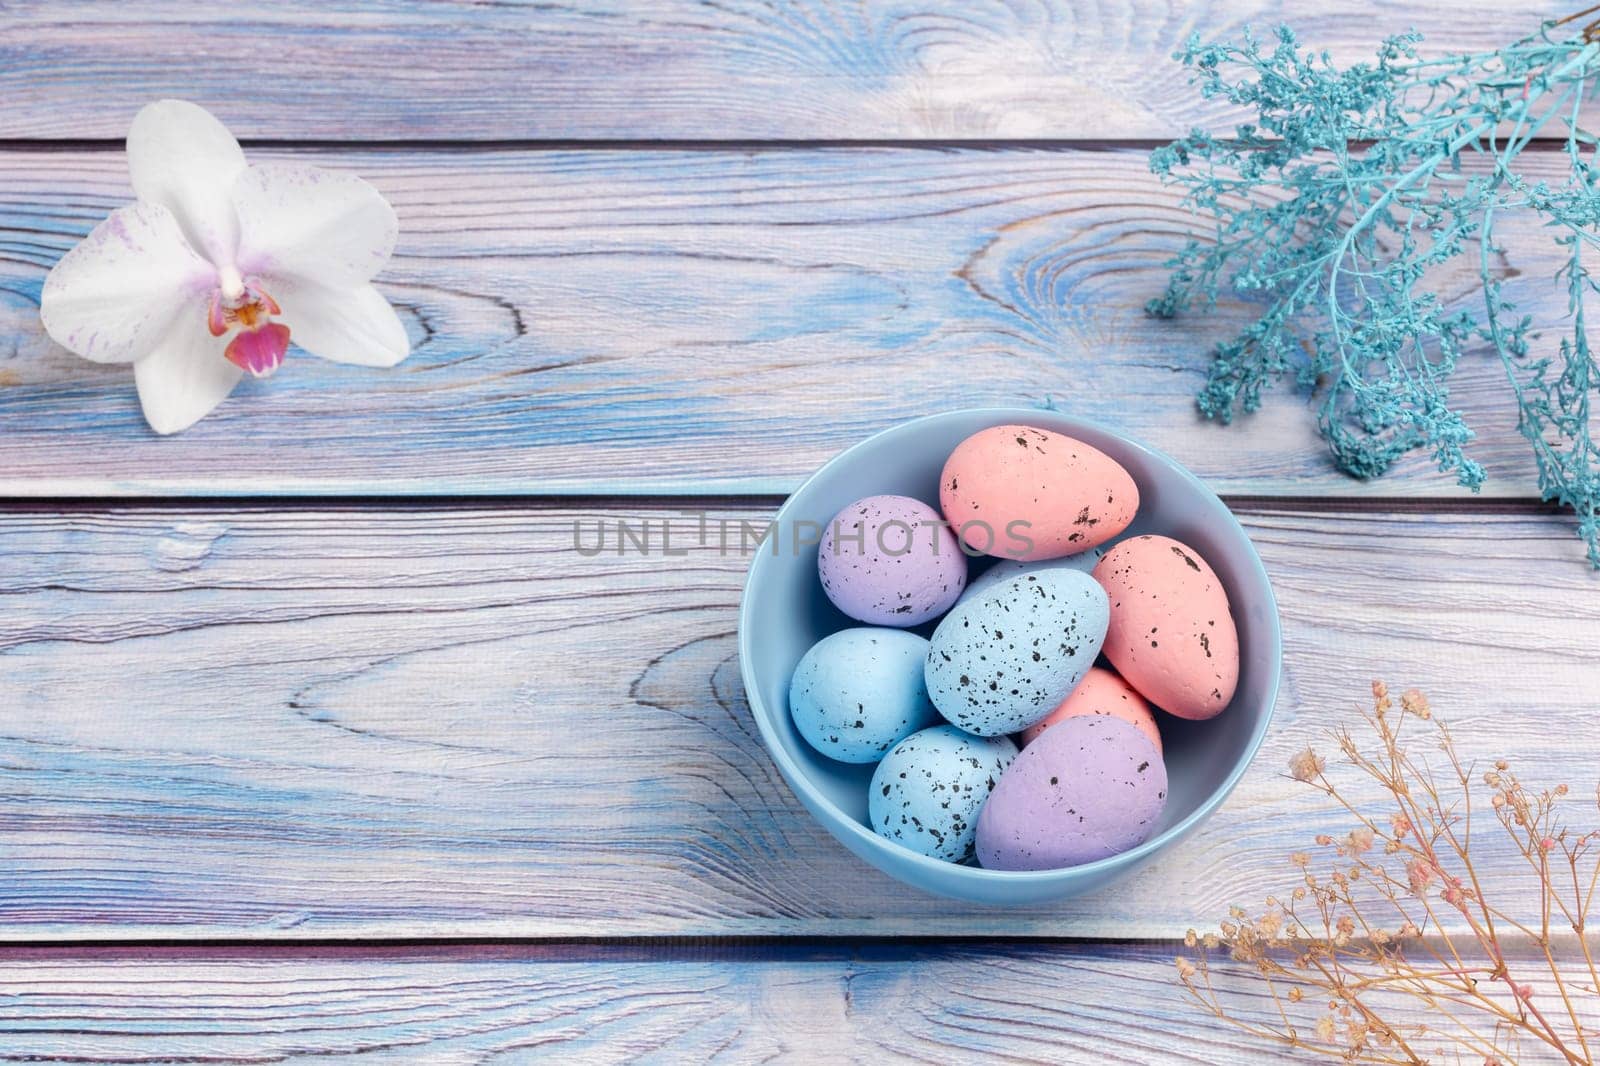 Bowl with colored Easter eggs on the wooden background. by mvg6894